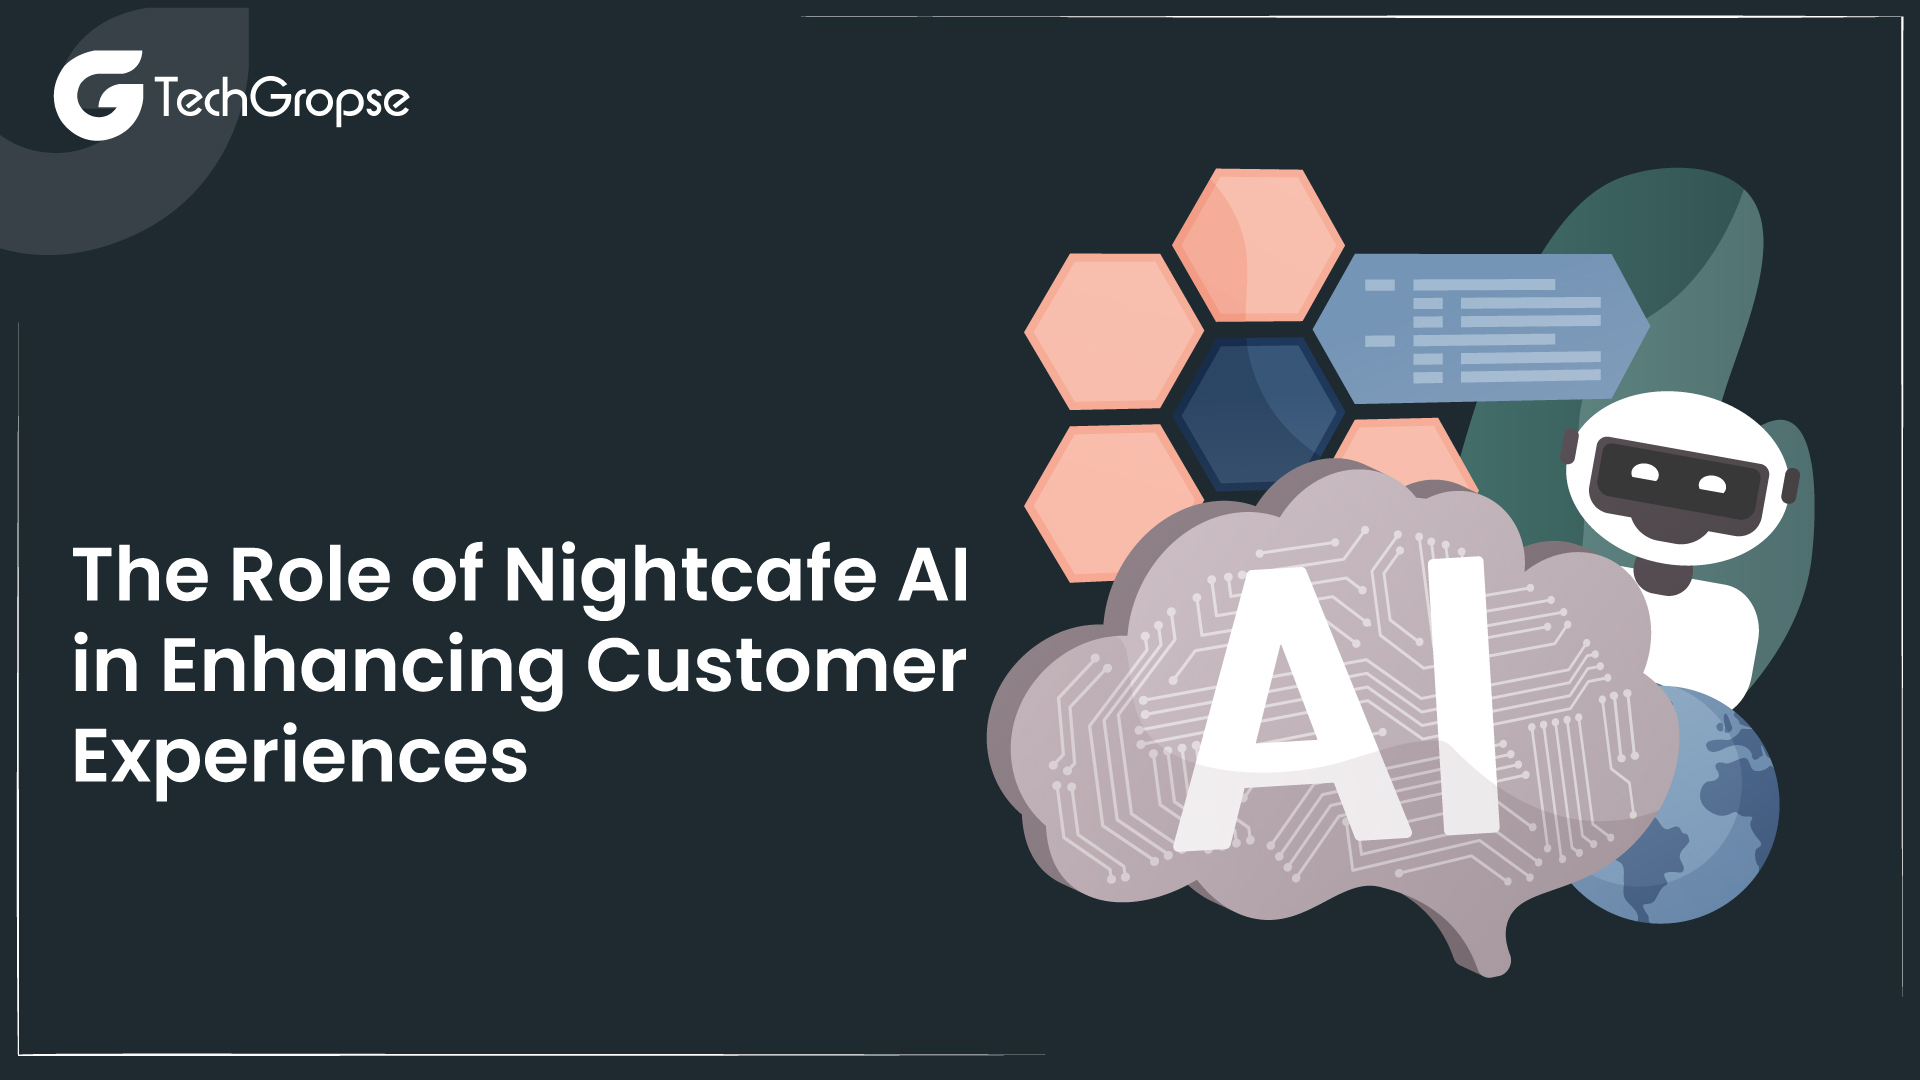 The Role of Nightcafe AI in Enhancing Customer Experiences